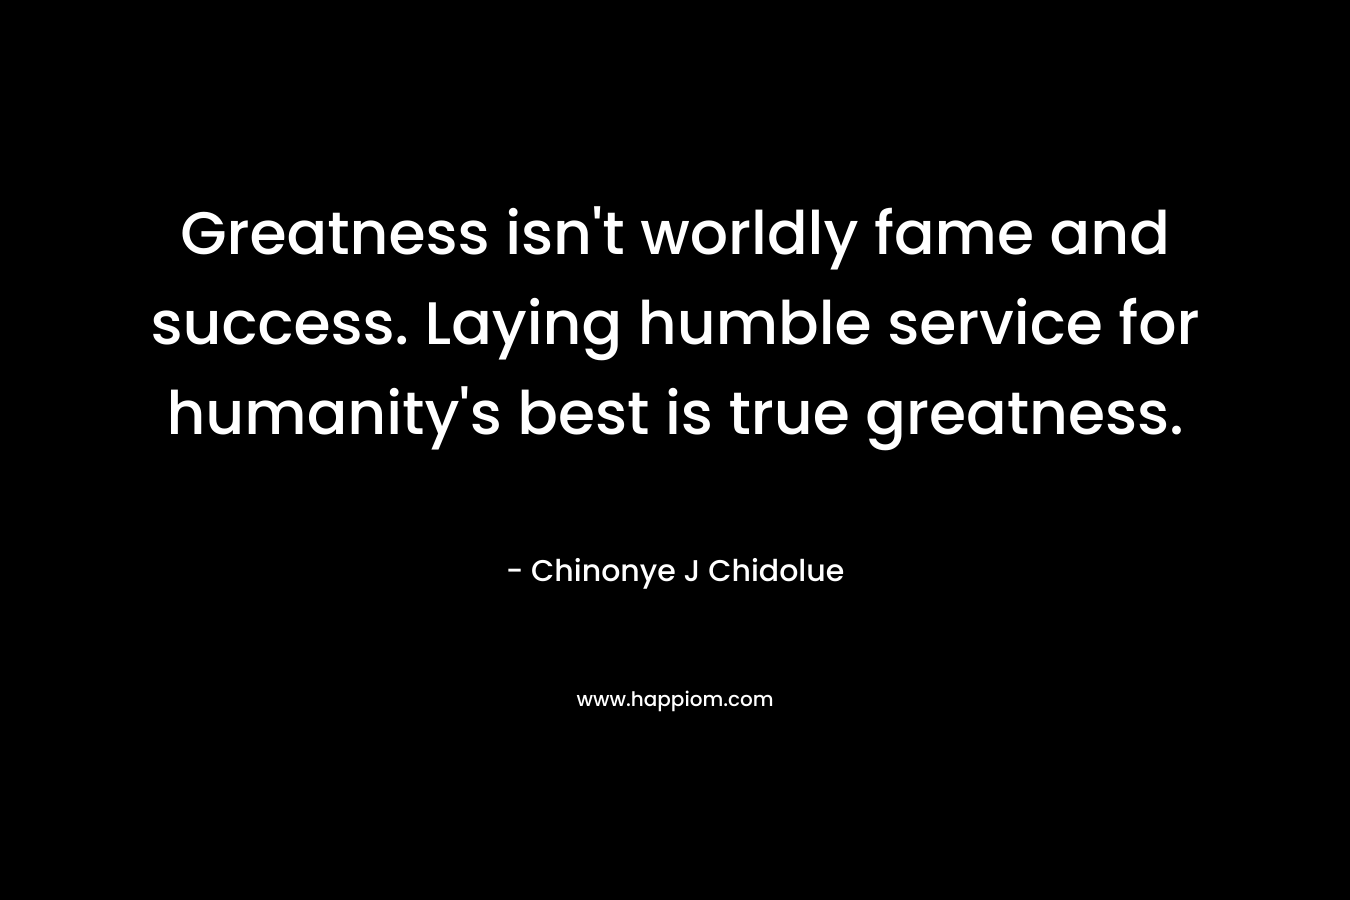 Greatness isn’t worldly fame and success. Laying humble service for humanity’s best is true greatness. – Chinonye J Chidolue